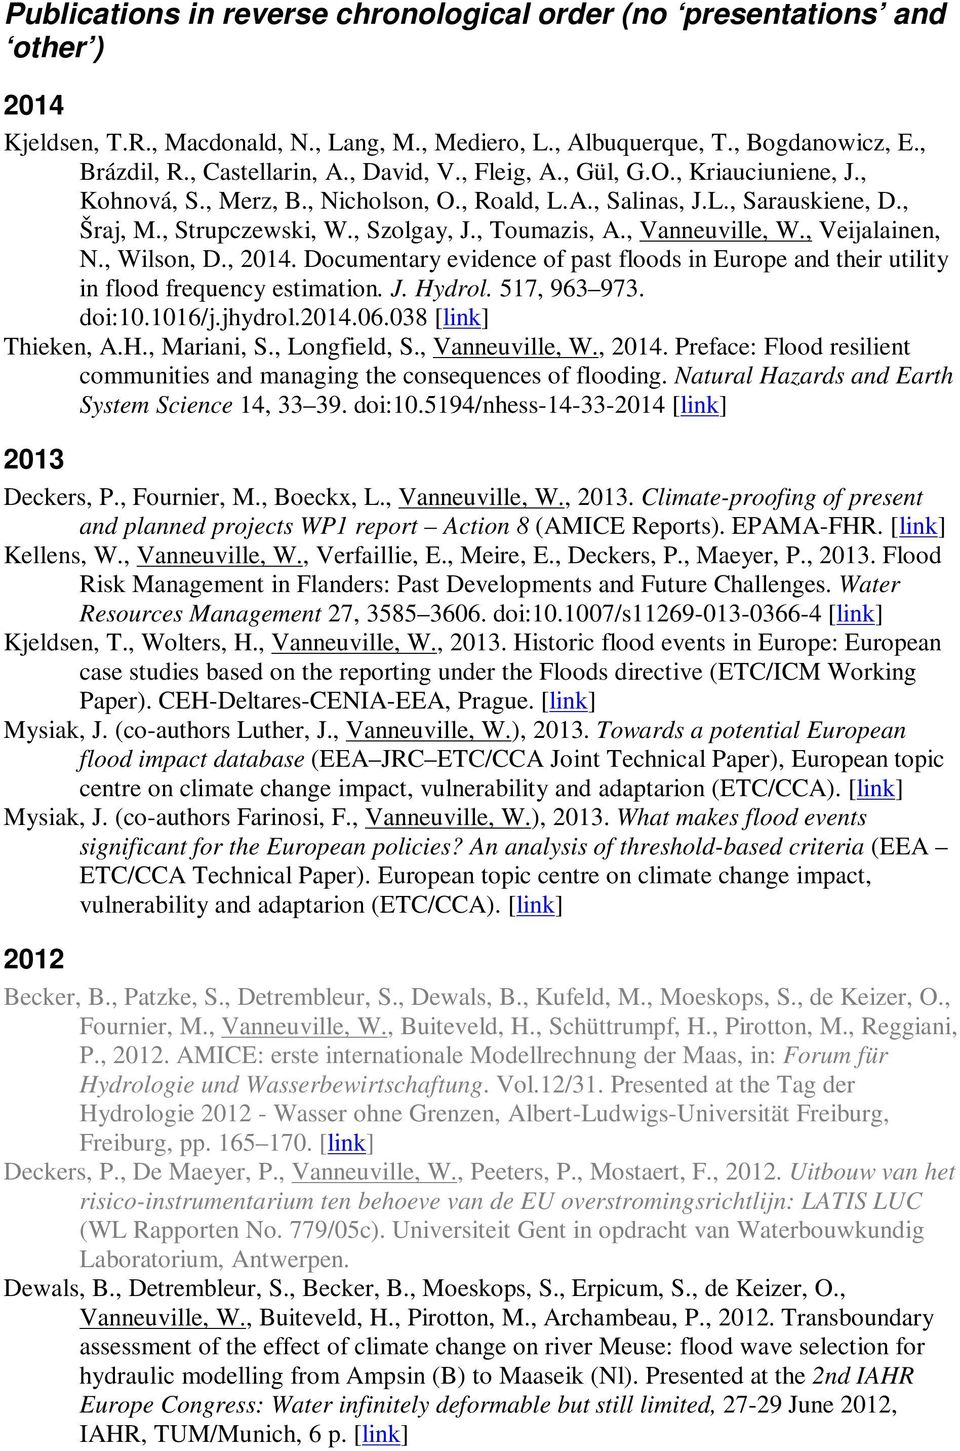 , Vanneuville, W., Veijalainen, N., Wilson, D., 2014. Documentary evidence of past floods in Europe and their utility in flood frequency estimation. J. Hydrol. 517, 963 973. doi:10.1016/j.jhydrol.